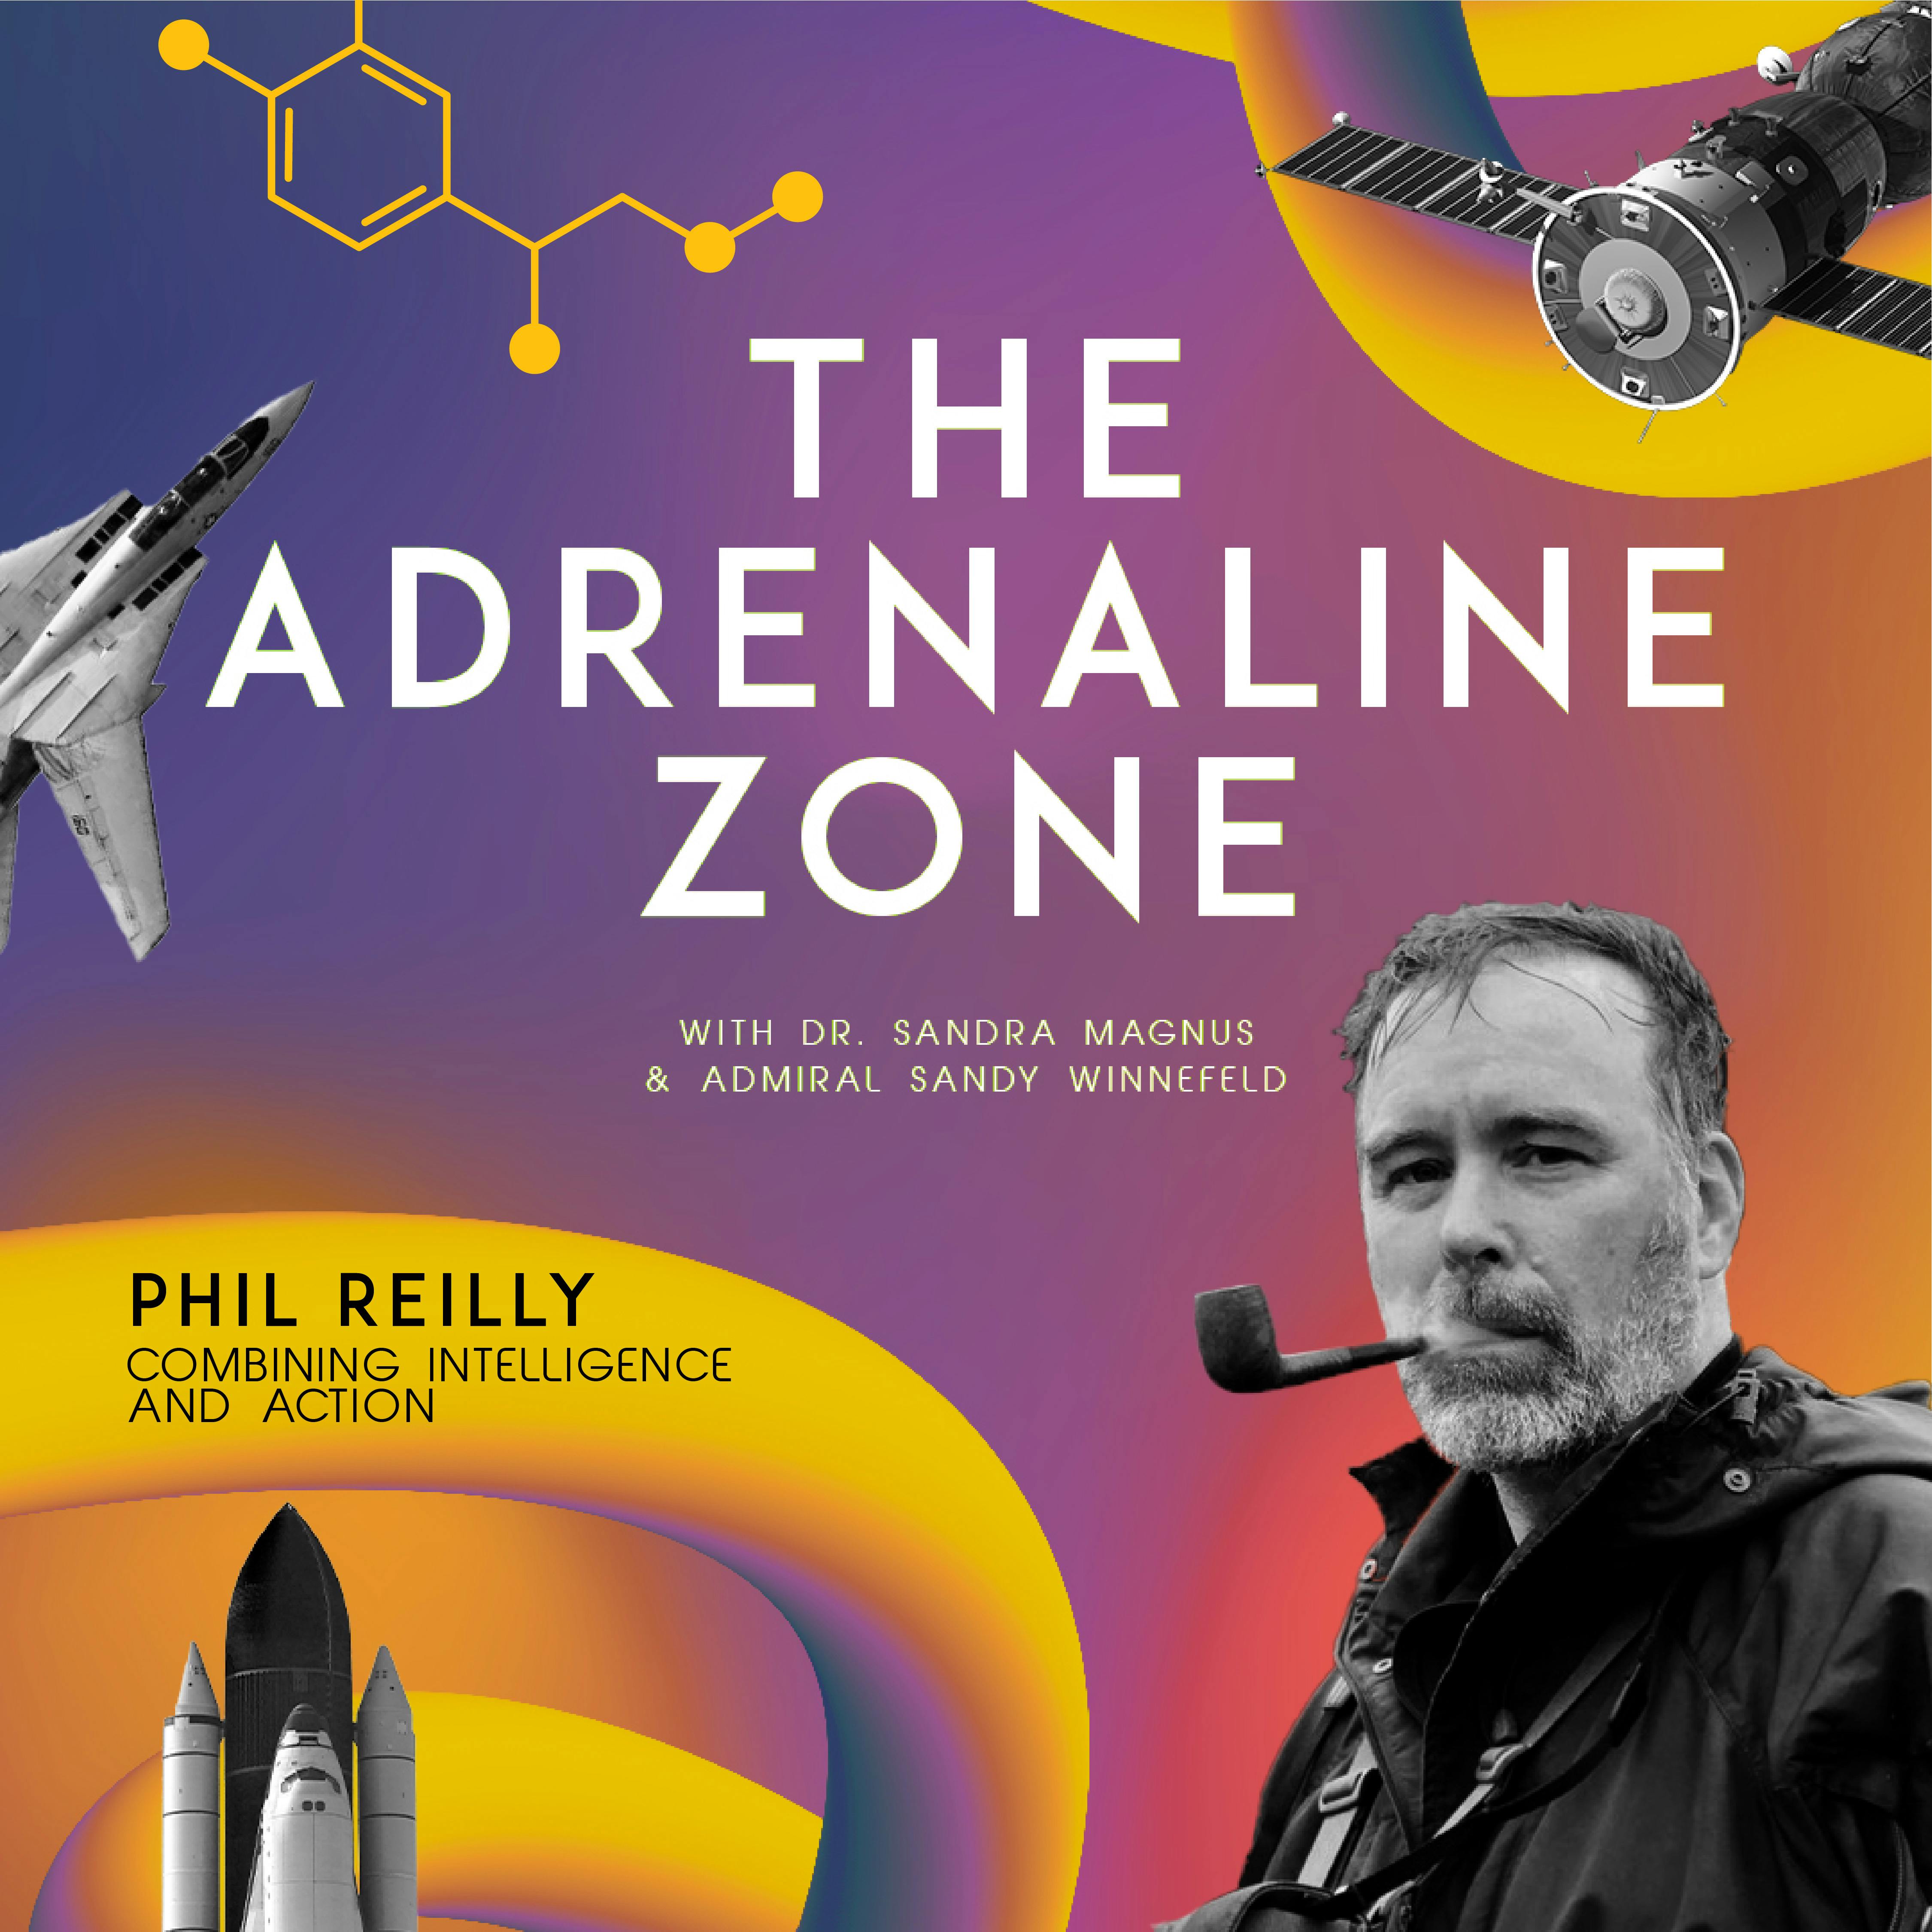 Combining Intelligence and Action with Phil Reilly